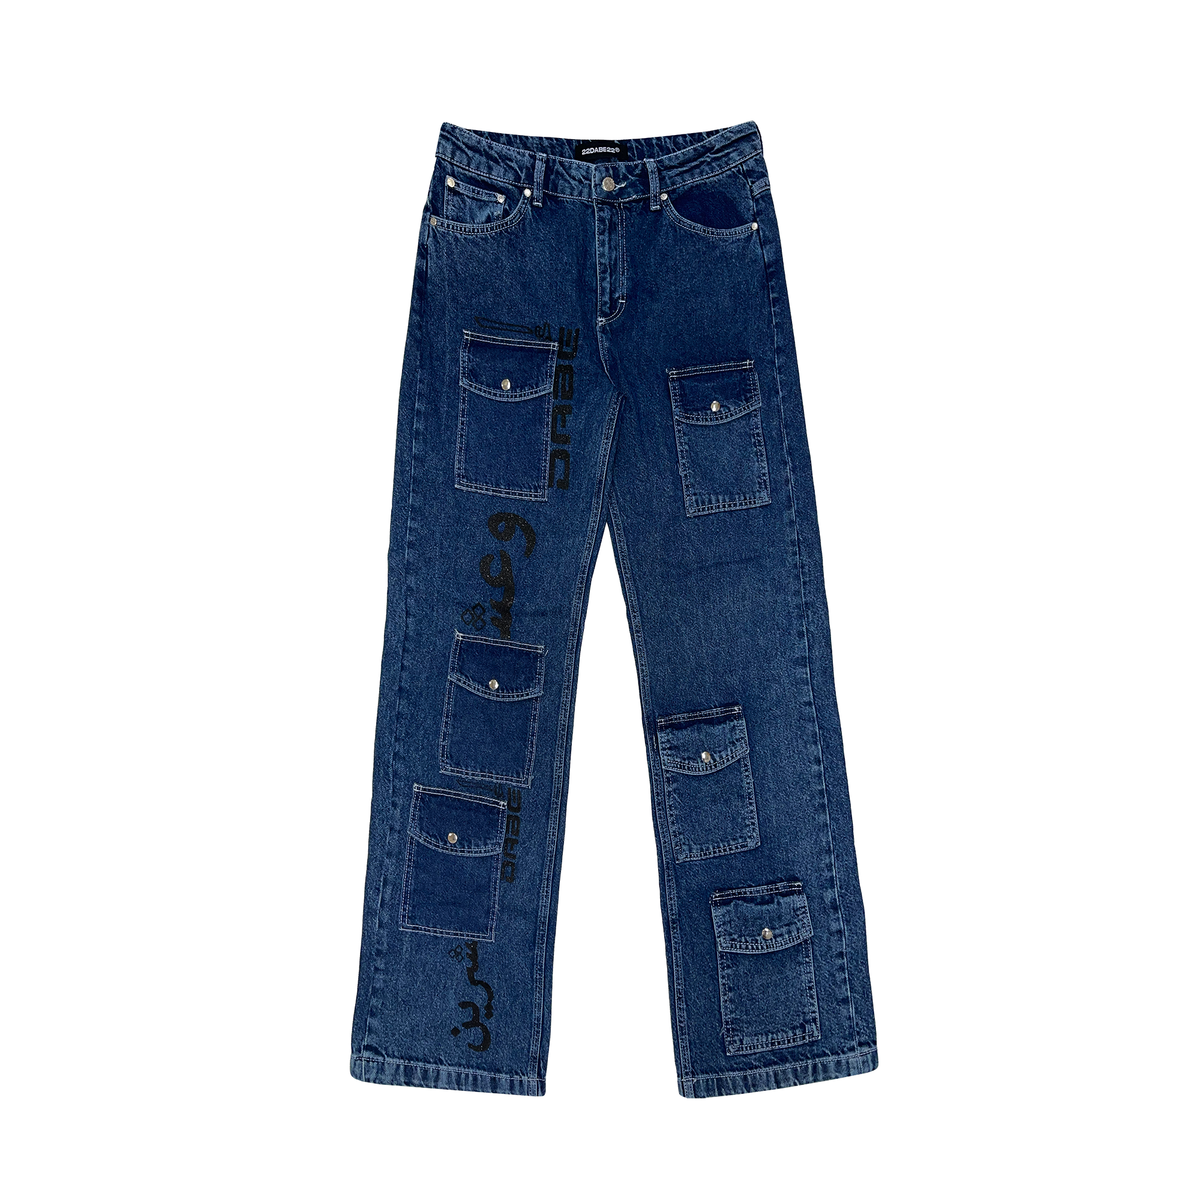 Stylish Indigo Blue Multi Pocket Denim Jeans by 22DABE22: The Ultimate in  Comfort and Functionality